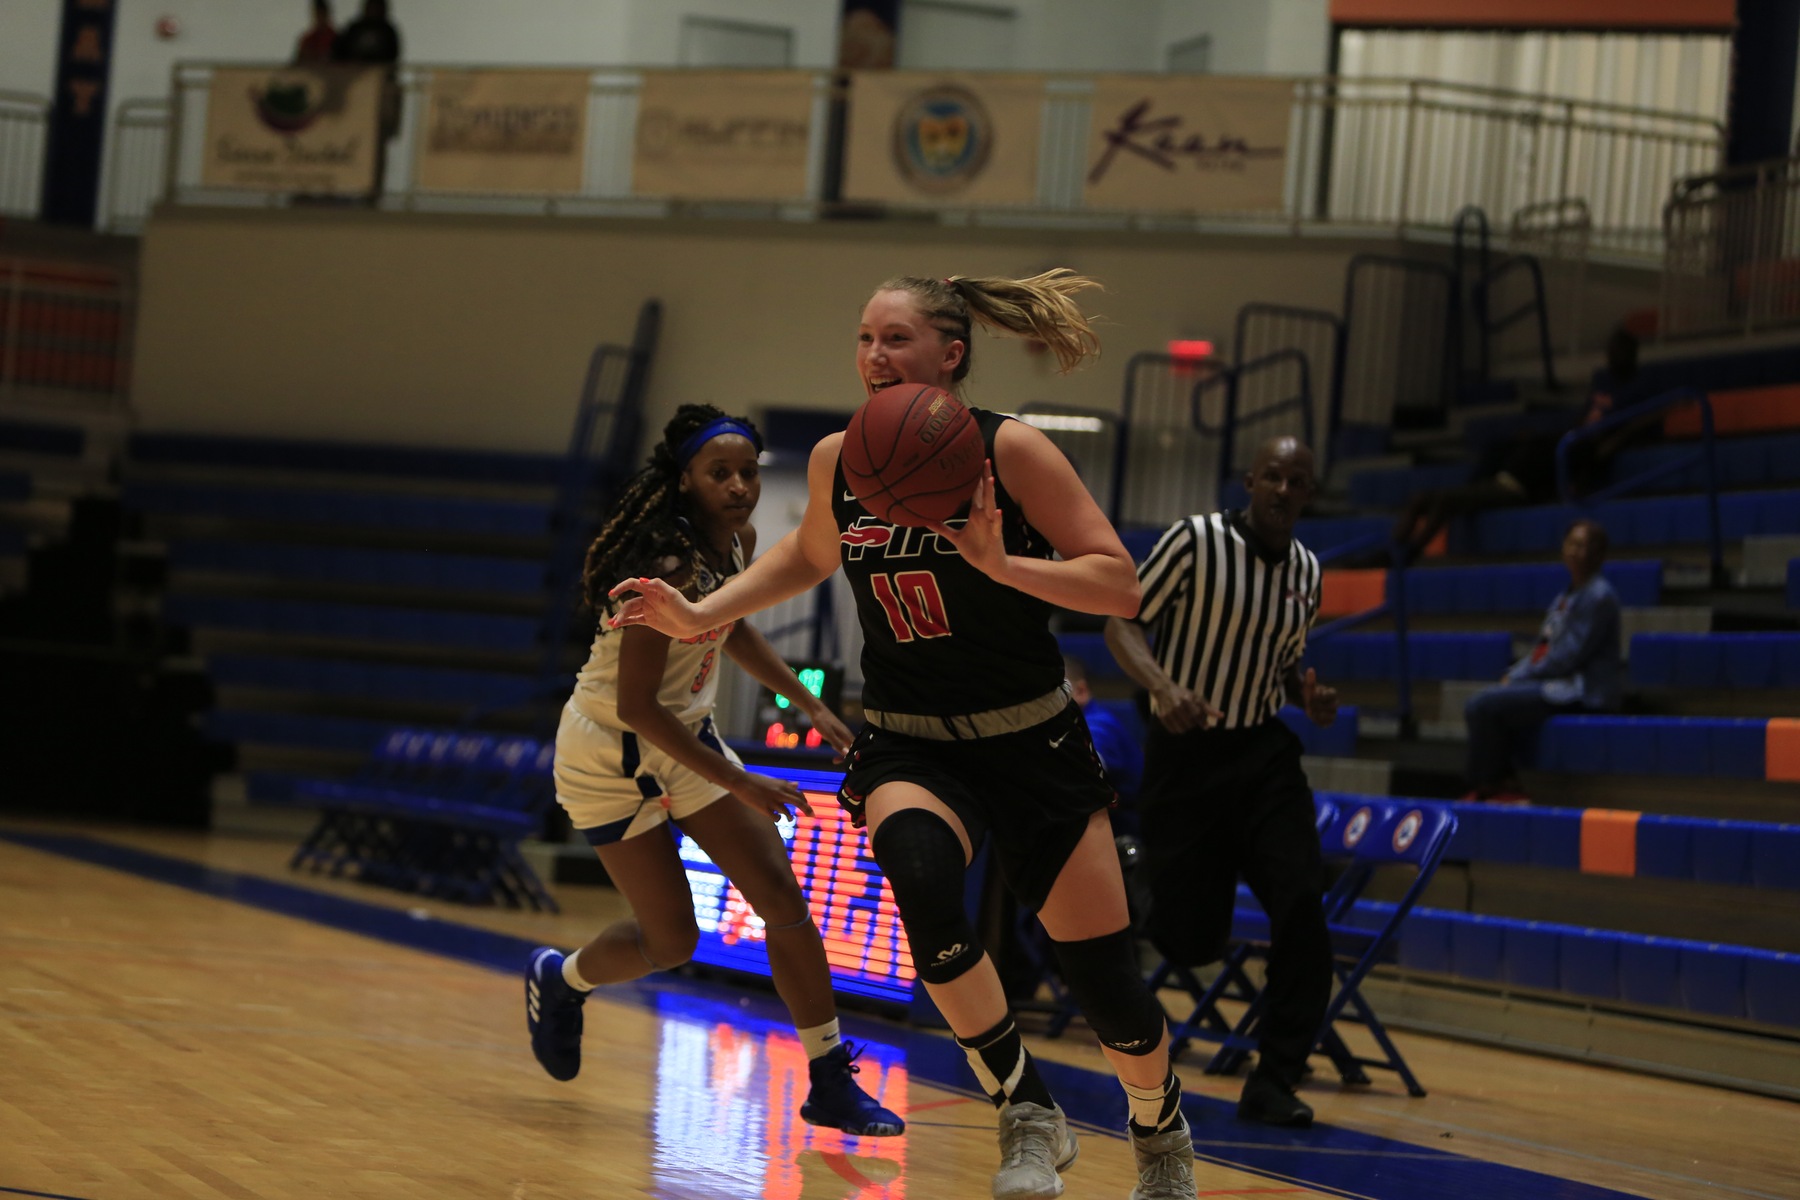 NAIA Division II Women's Basketball National Player of the Week - No. 5